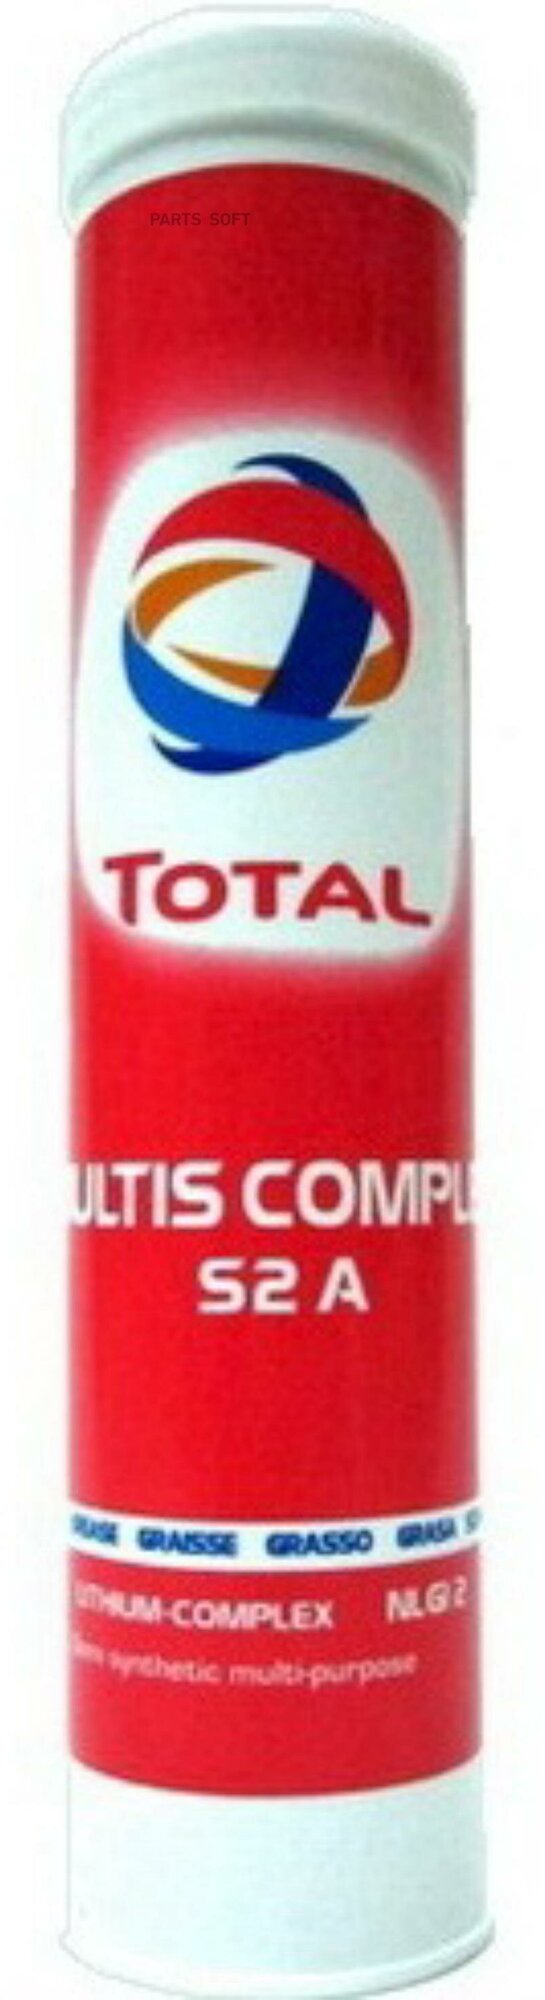 TOTALENERGIES 160833 Смазка 0,4кг Total Multis Complex S2A